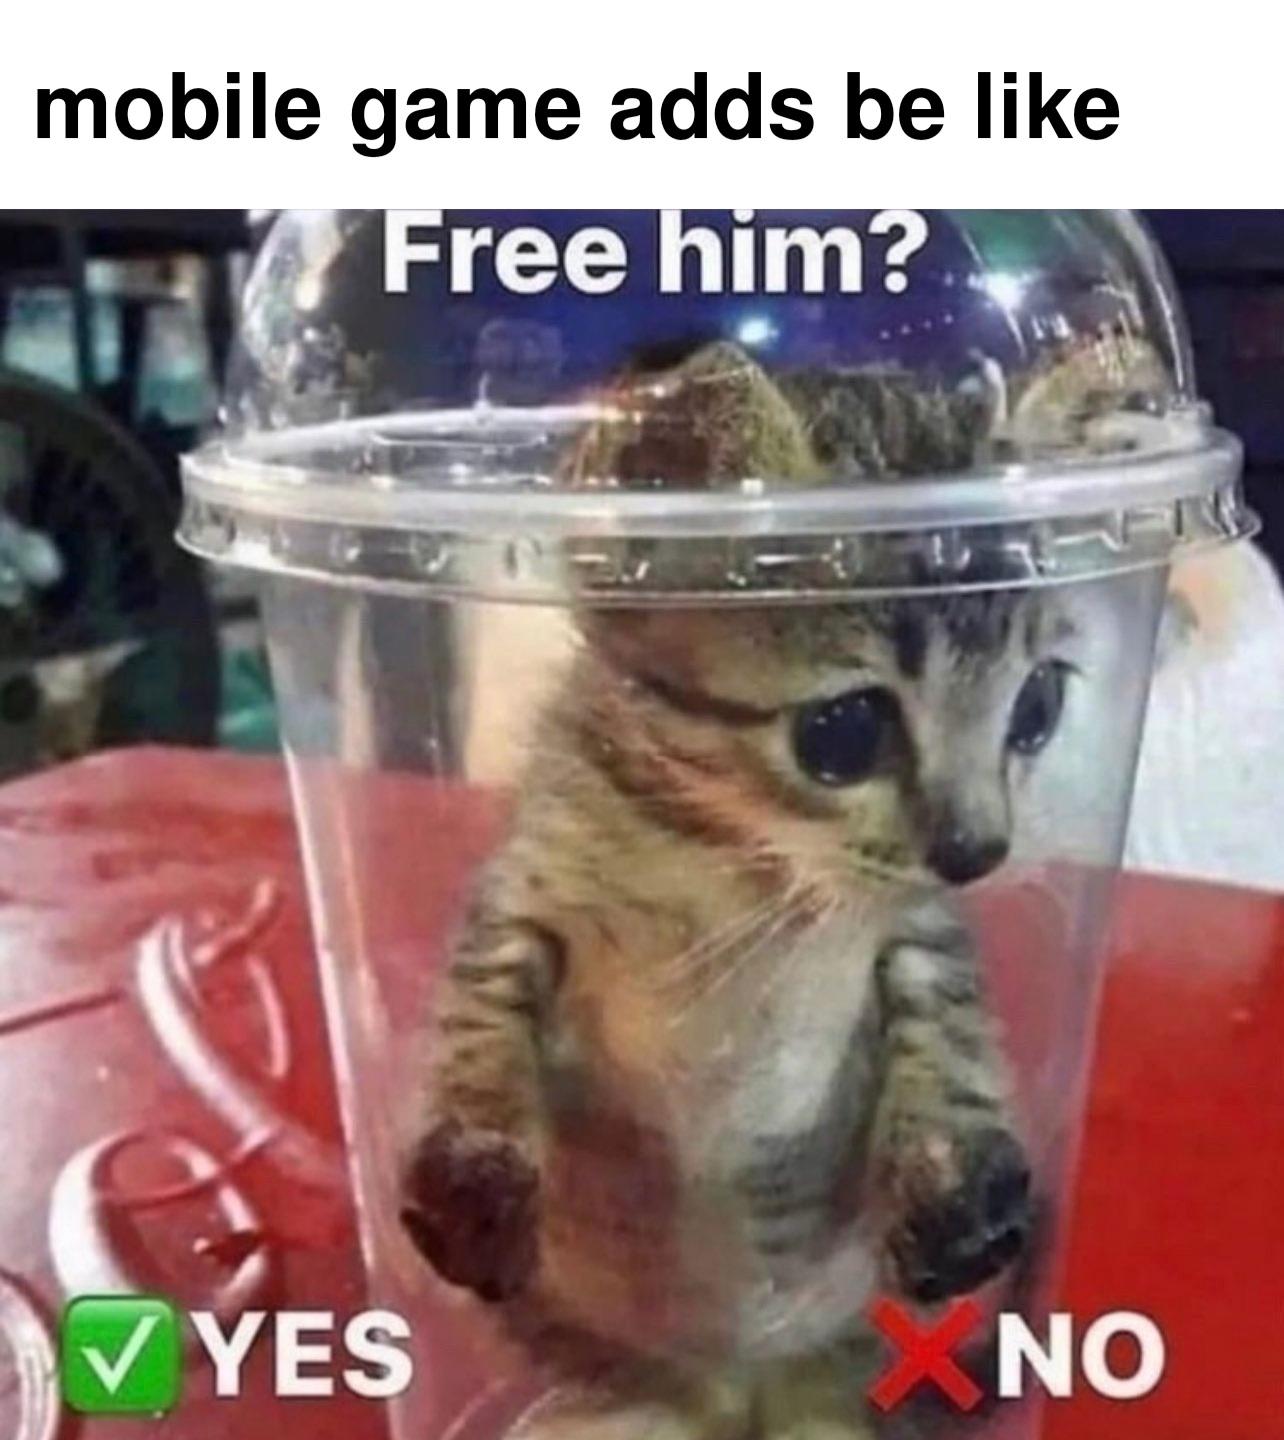 dank memes - free him cat - mobile game adds be Free him? Yes No